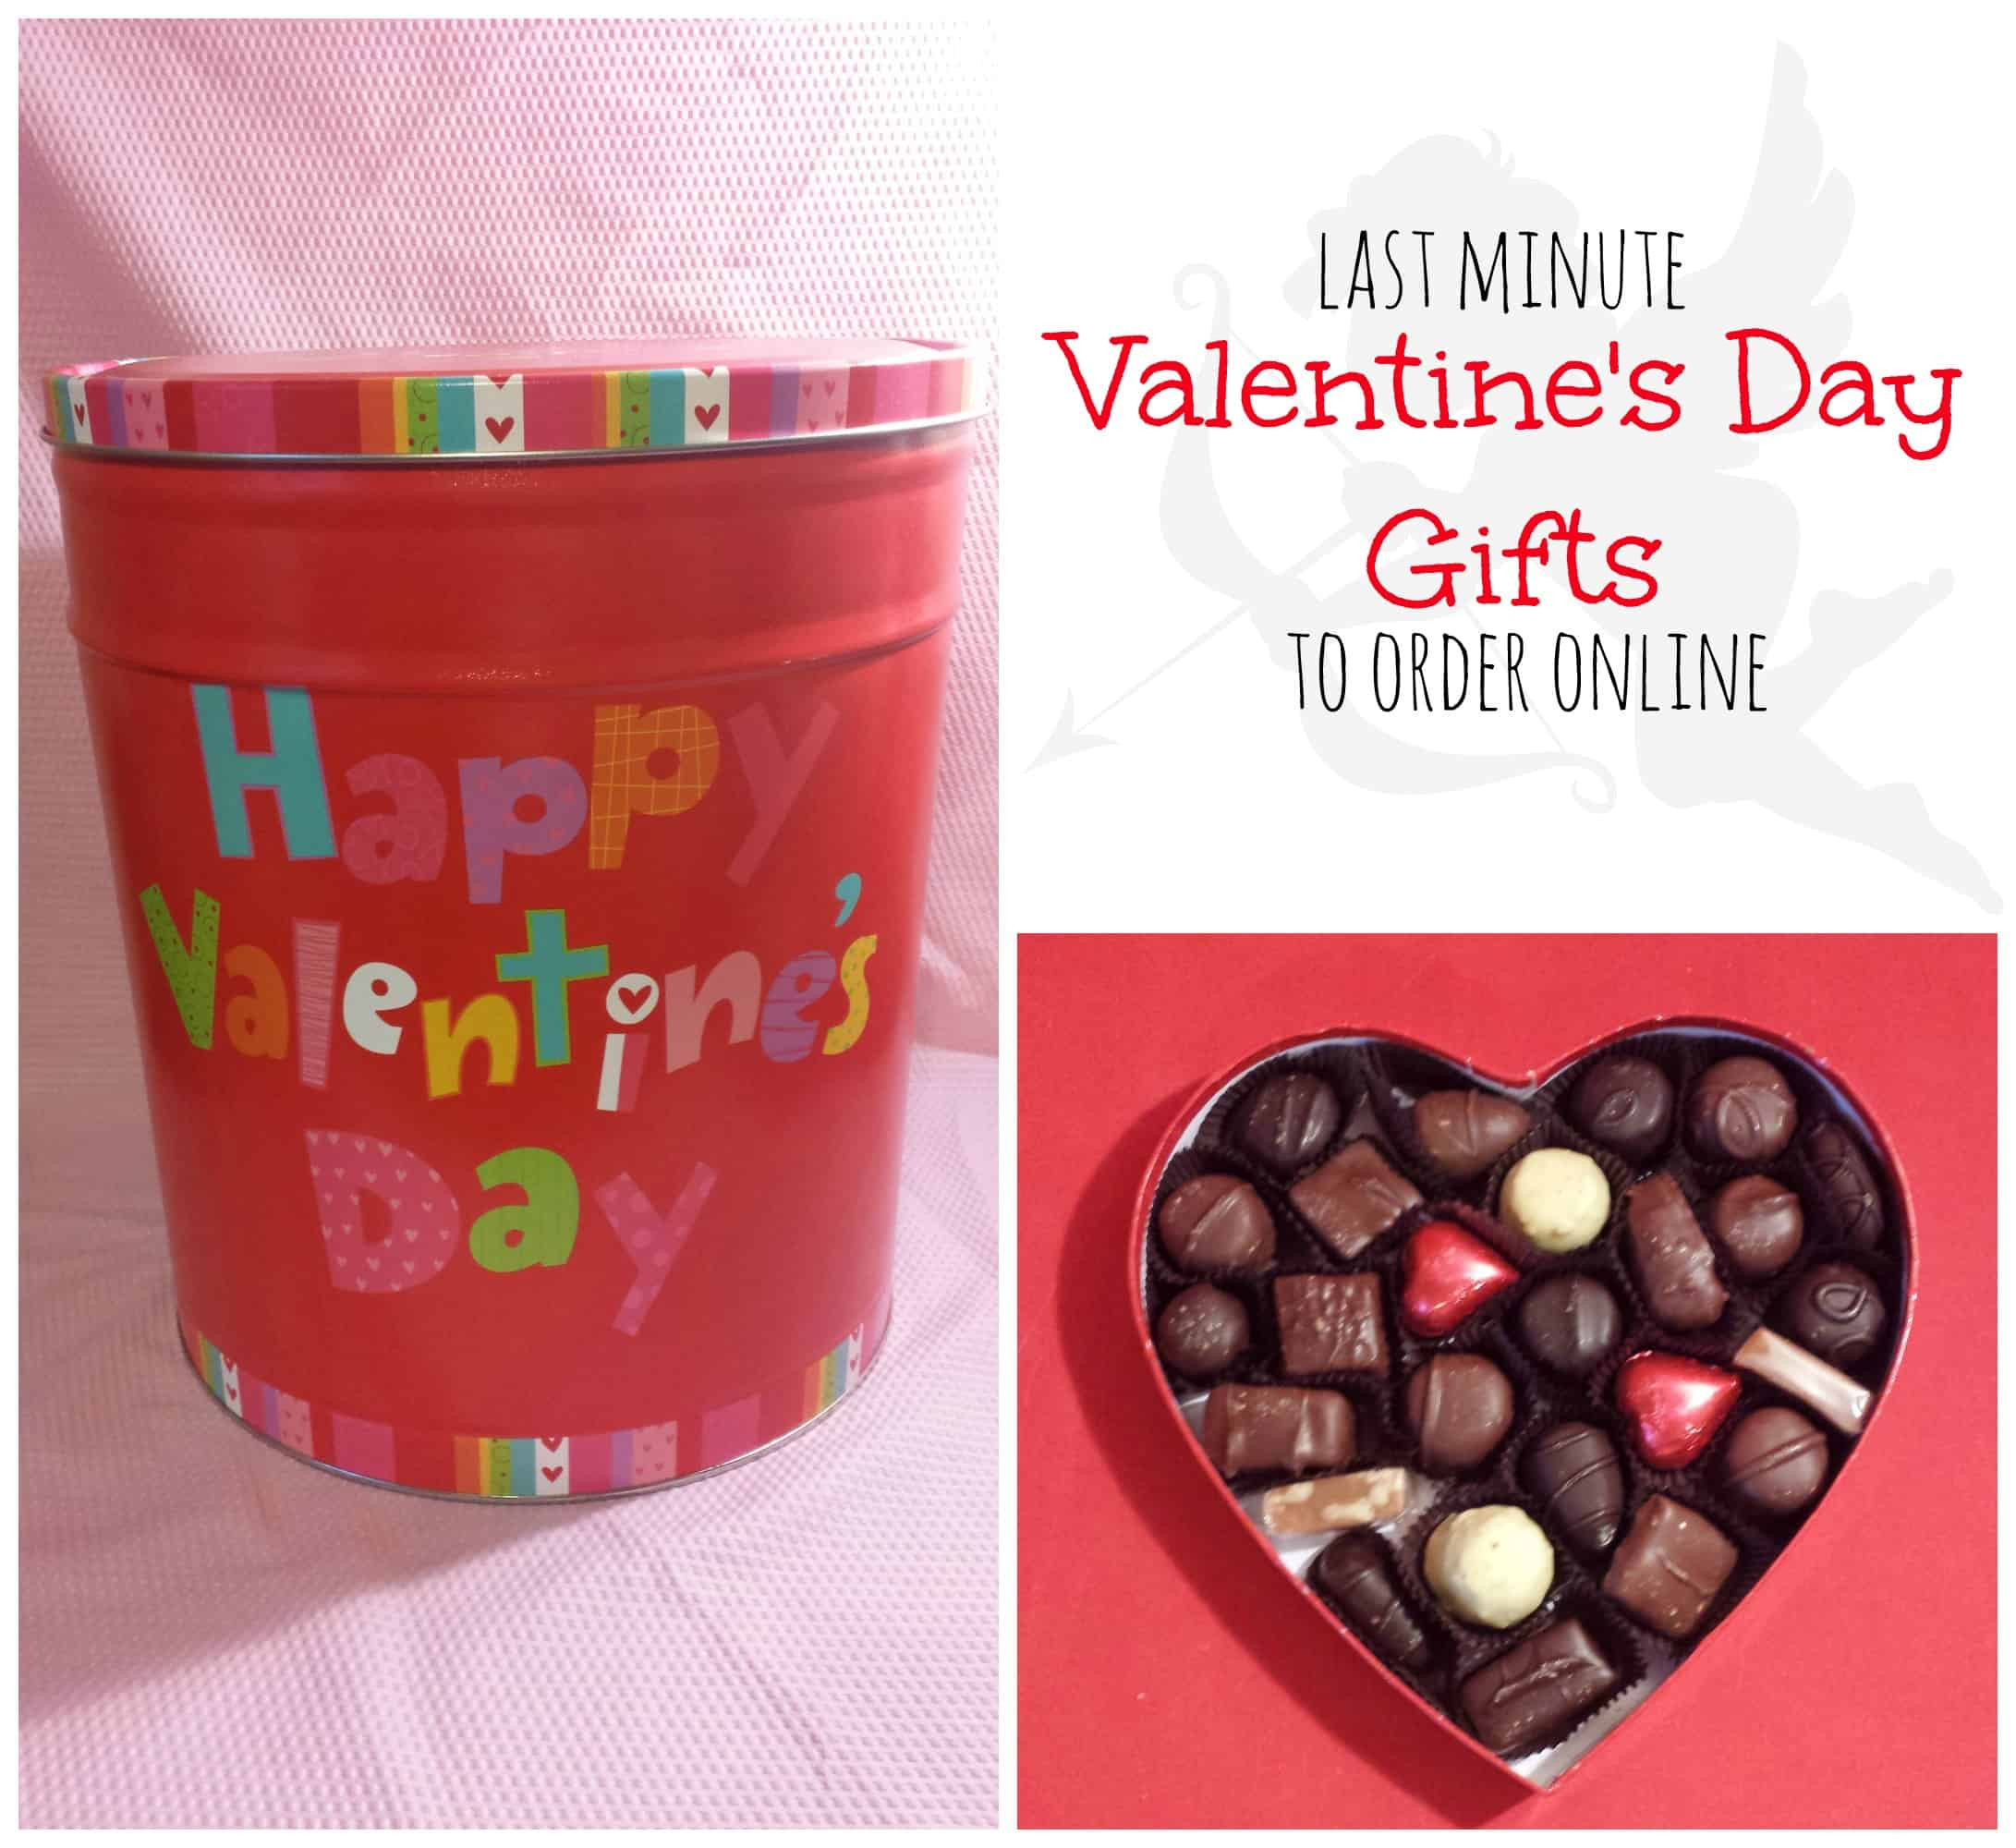 Valentines Day Online Gifts
 Last Minute Valentine’s Day Gifts to Order line